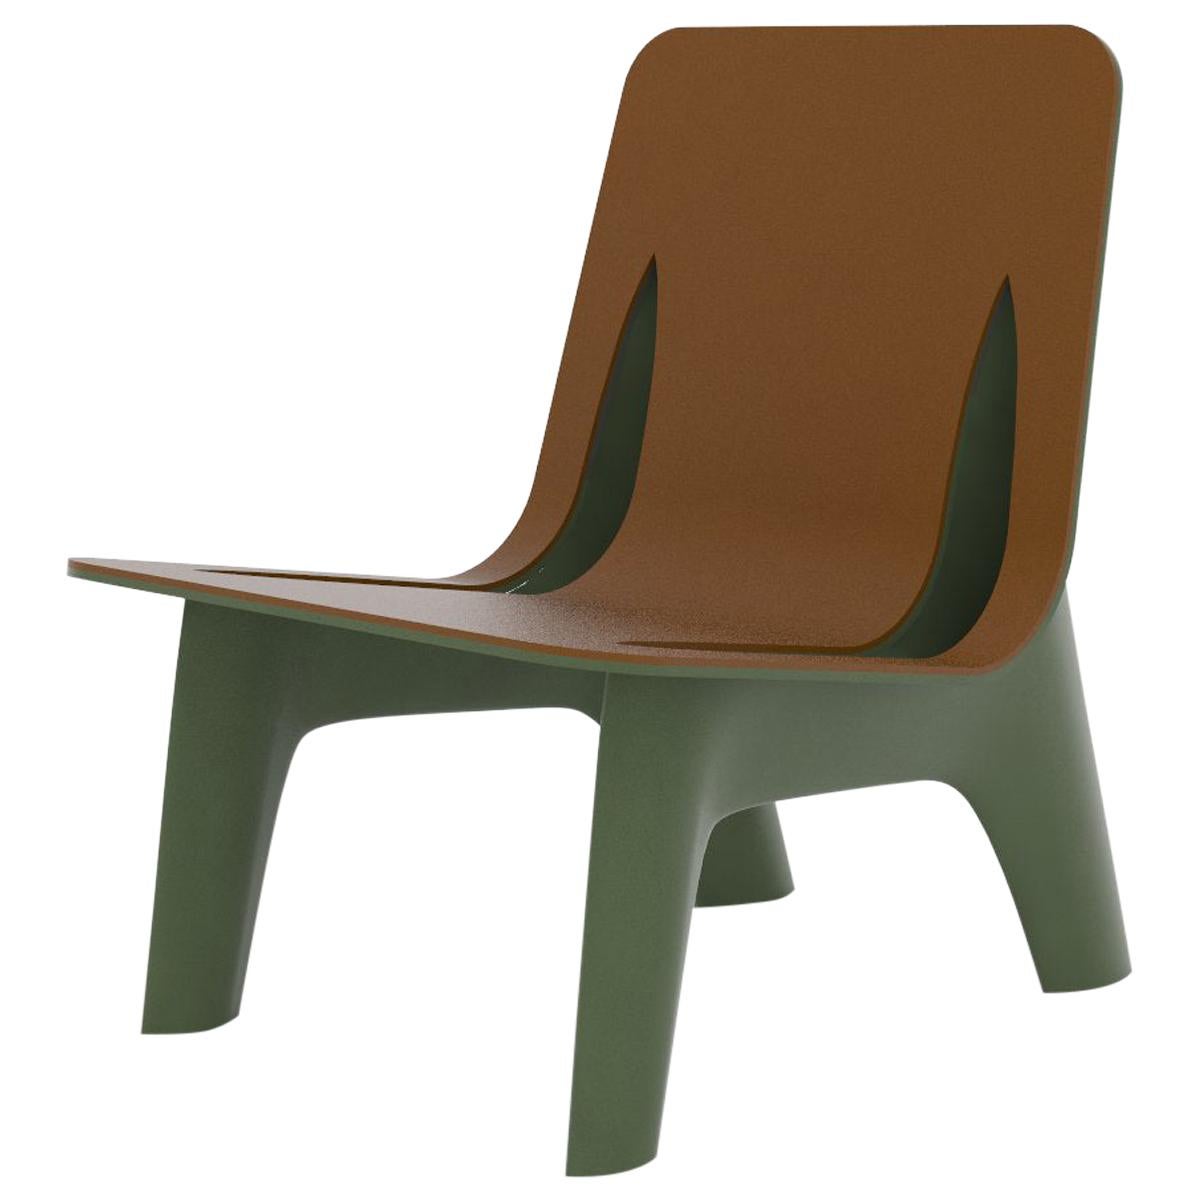 J-Chair Lounge Polished Olive Green Color Carbon Steel+Leather Seating by Zieta